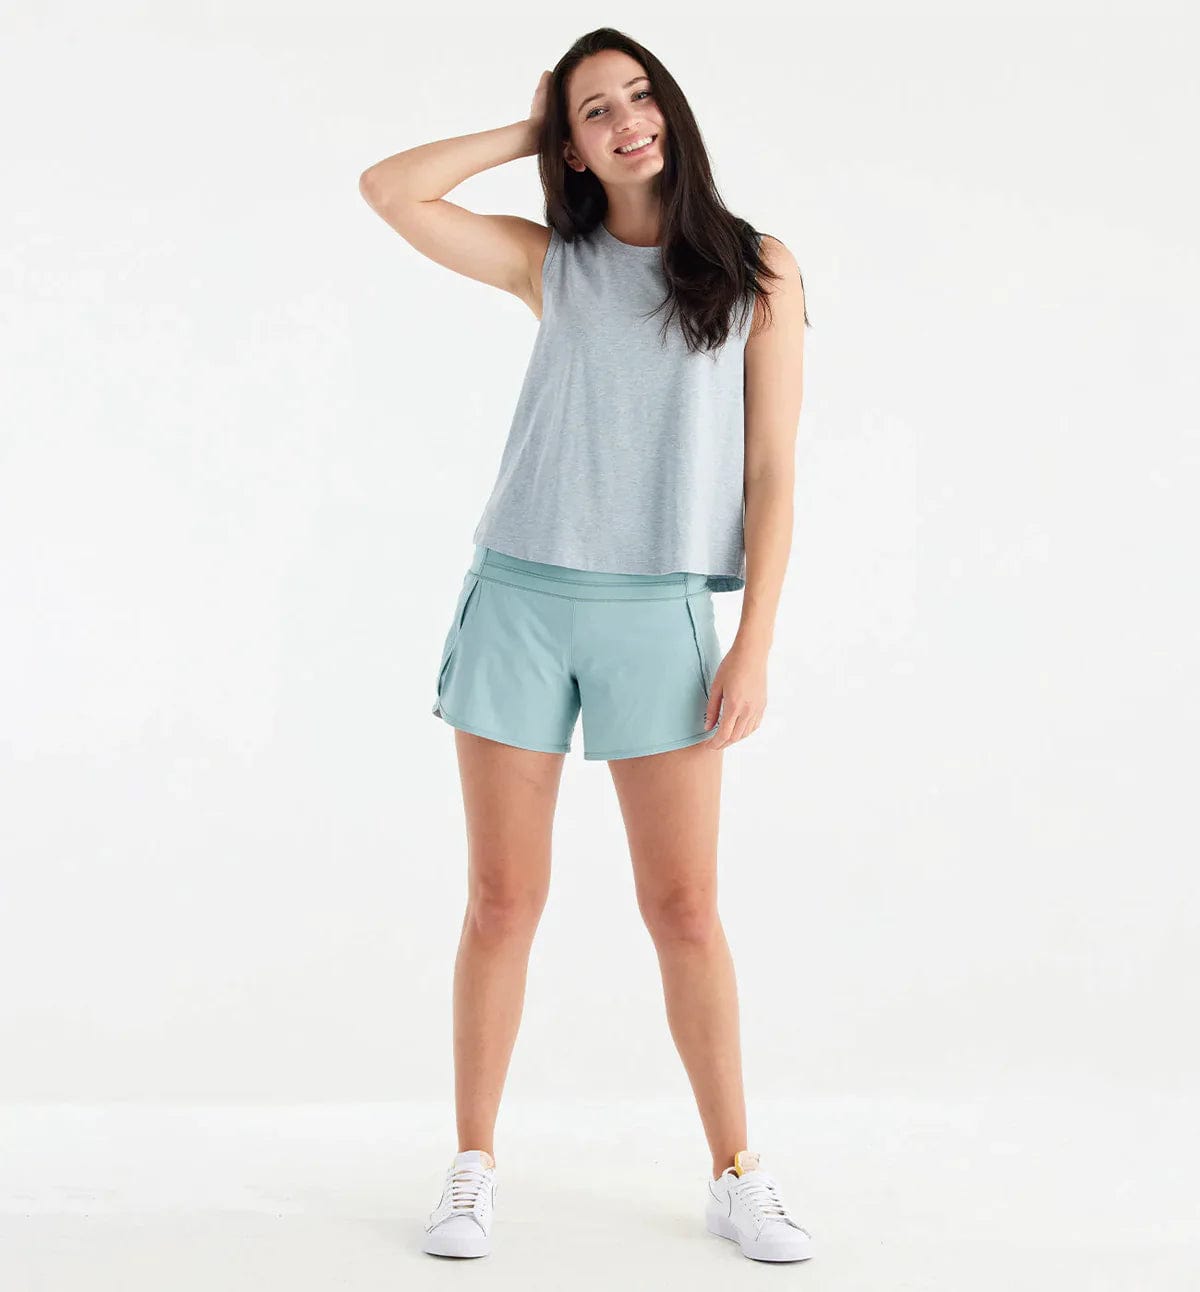 Free Fly Apparel Shorts Sea Glass / XS Women's Bamboo-Lined Breeze Short - 4"